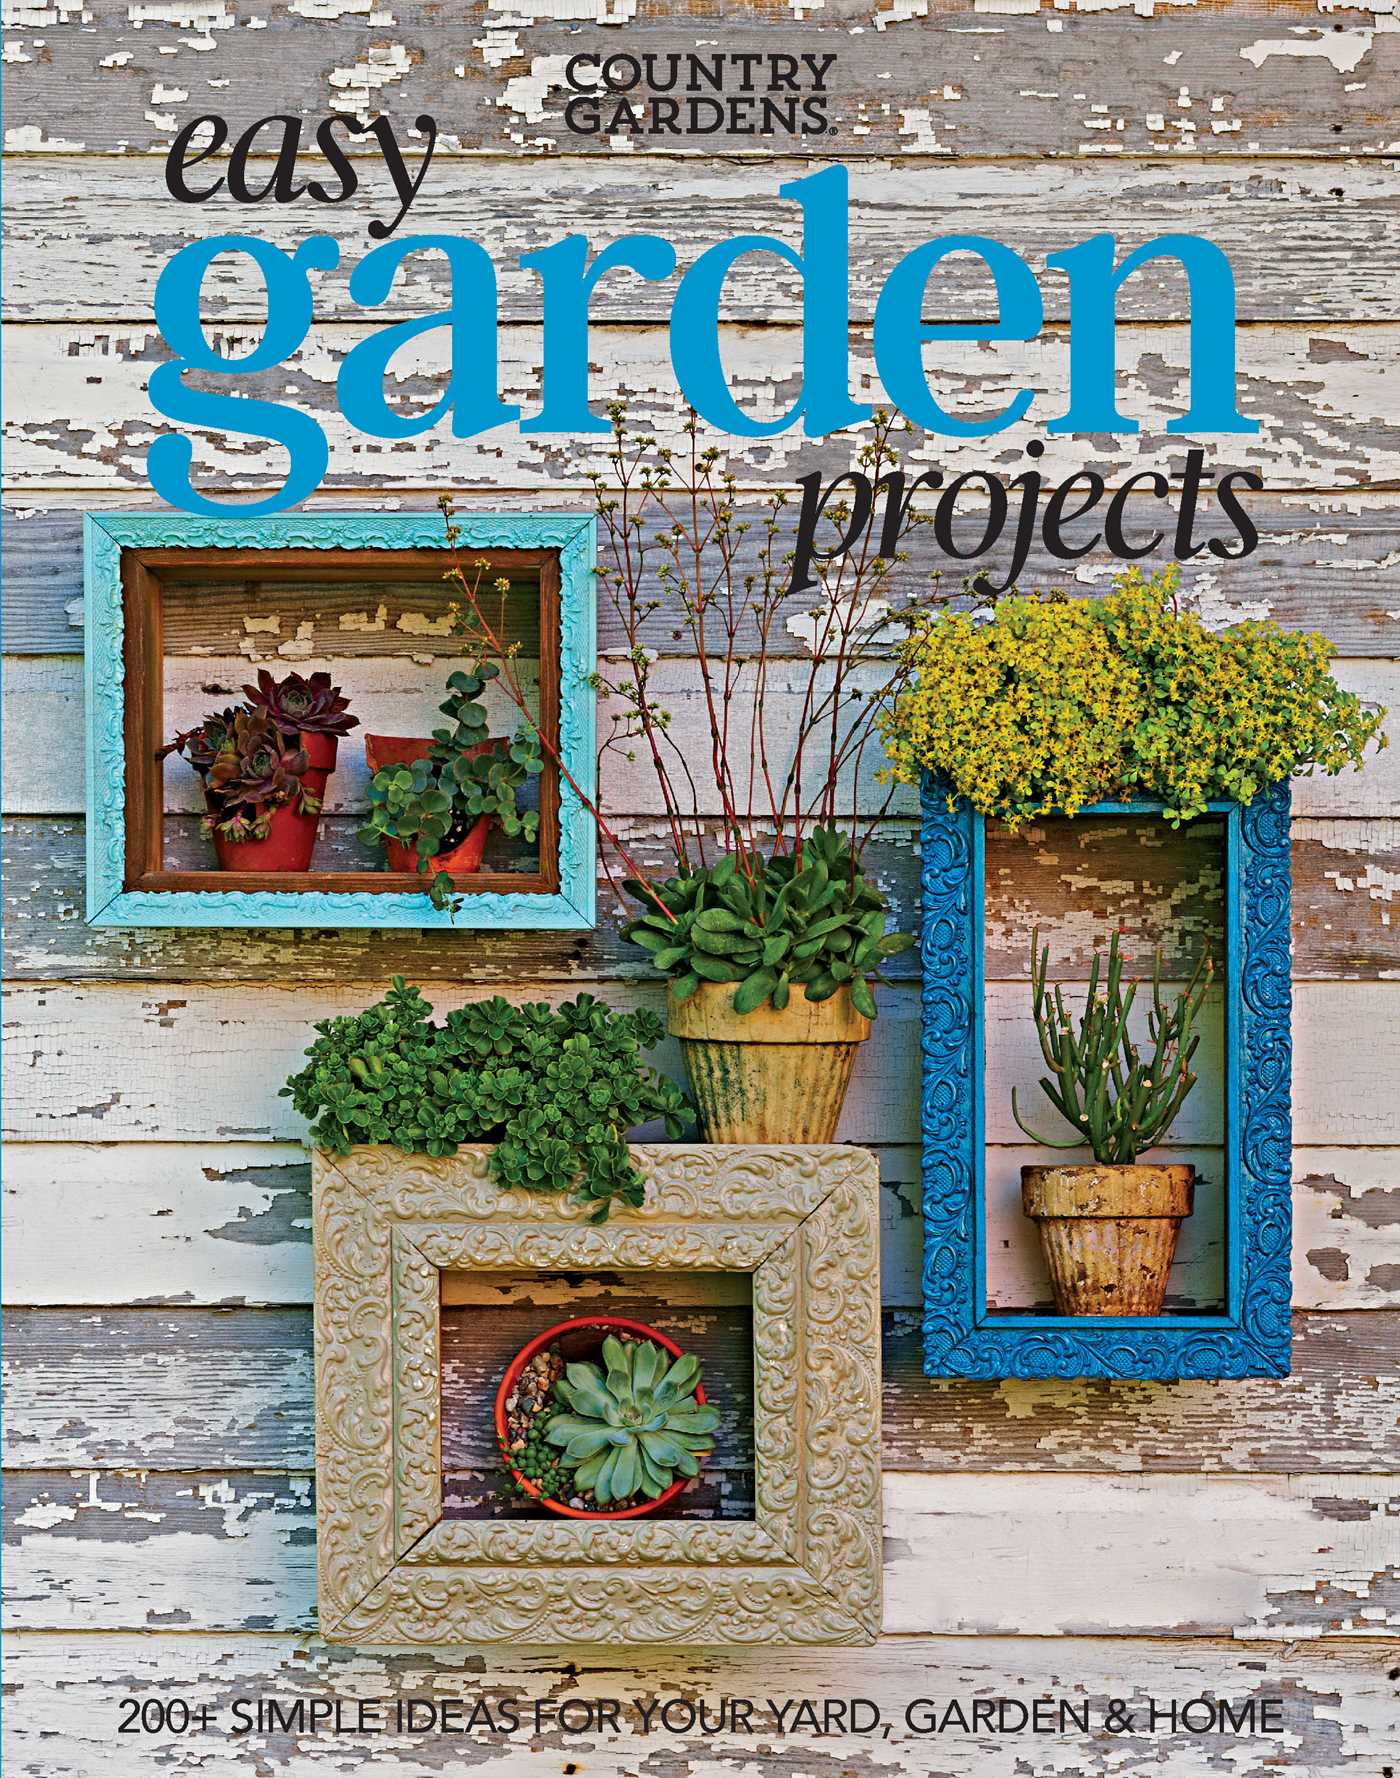 Easy Garden Projects : 200+ Simple Ideas for Your Yard, Garden & Home